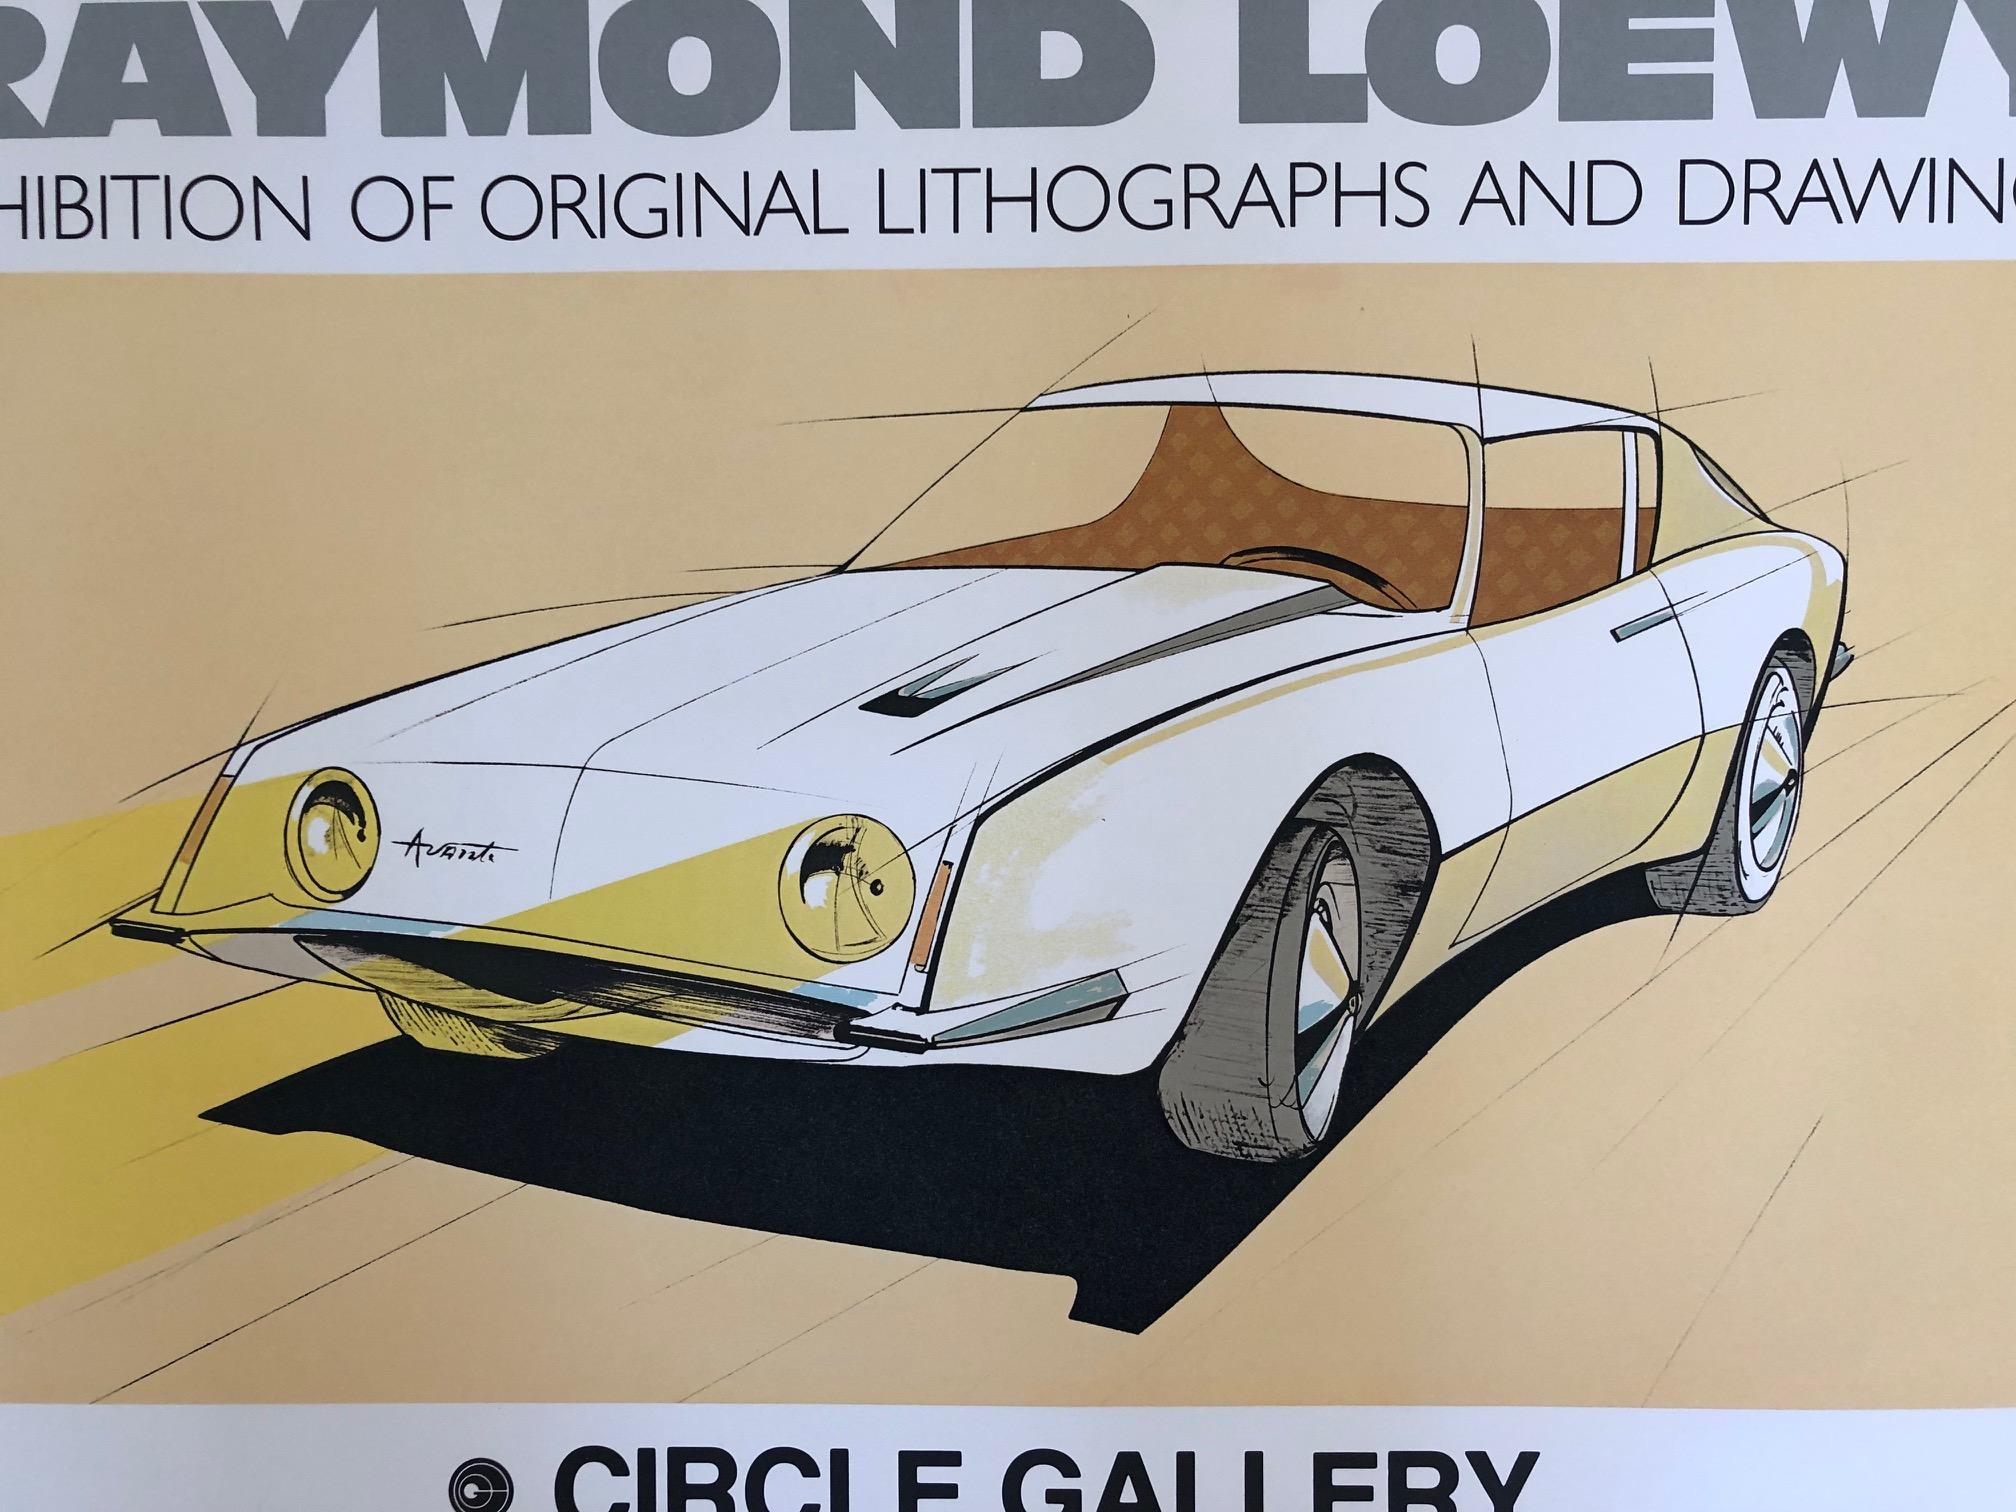 An interesting Raymond Loewy poster from Circle Gallery, circa 1979. The famed industrial designer' exhibition of drawings, sketches, etc...